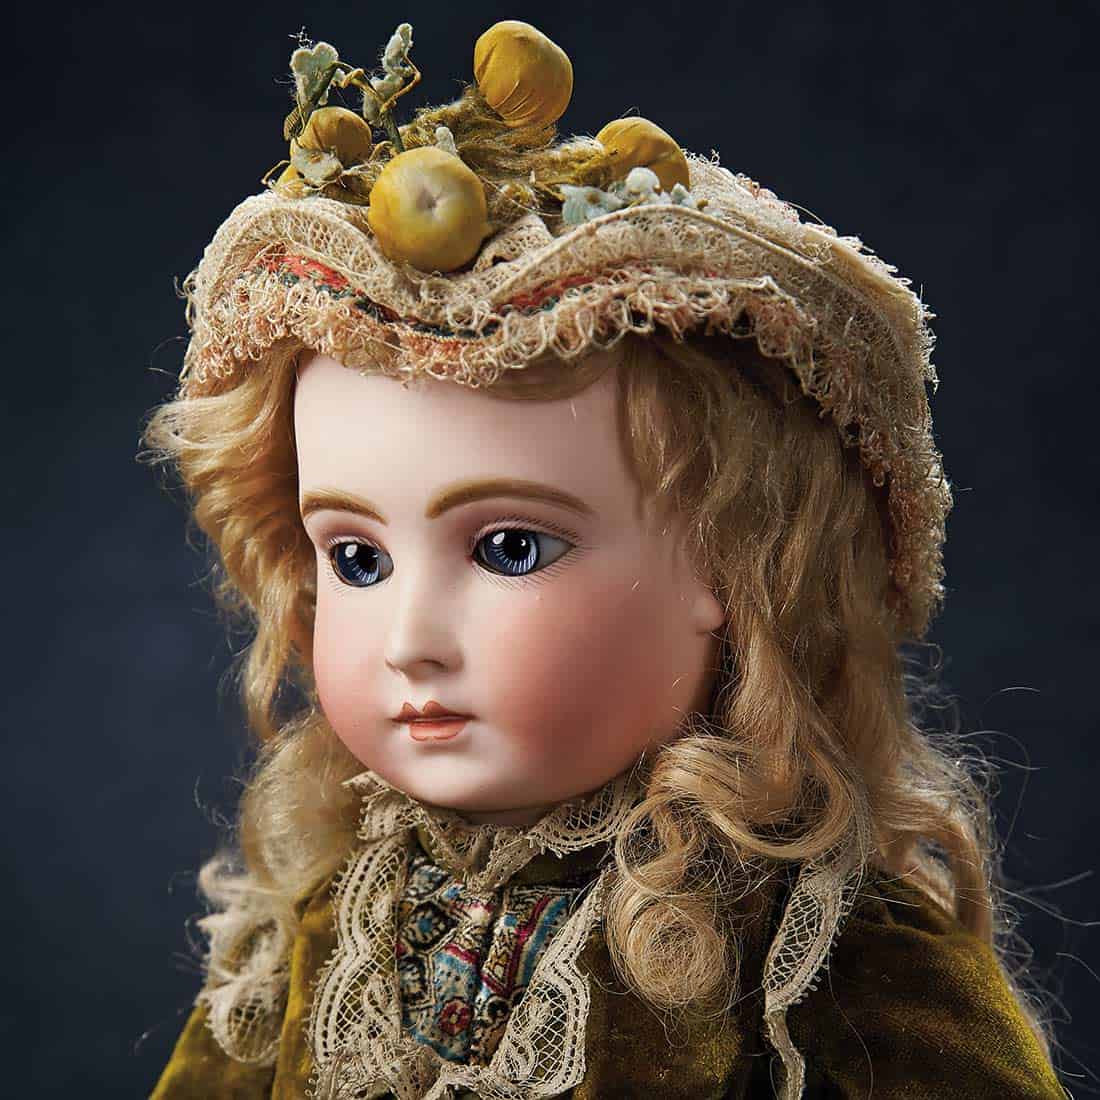 18-inch French Bisque Doll by Aristide Halopeau